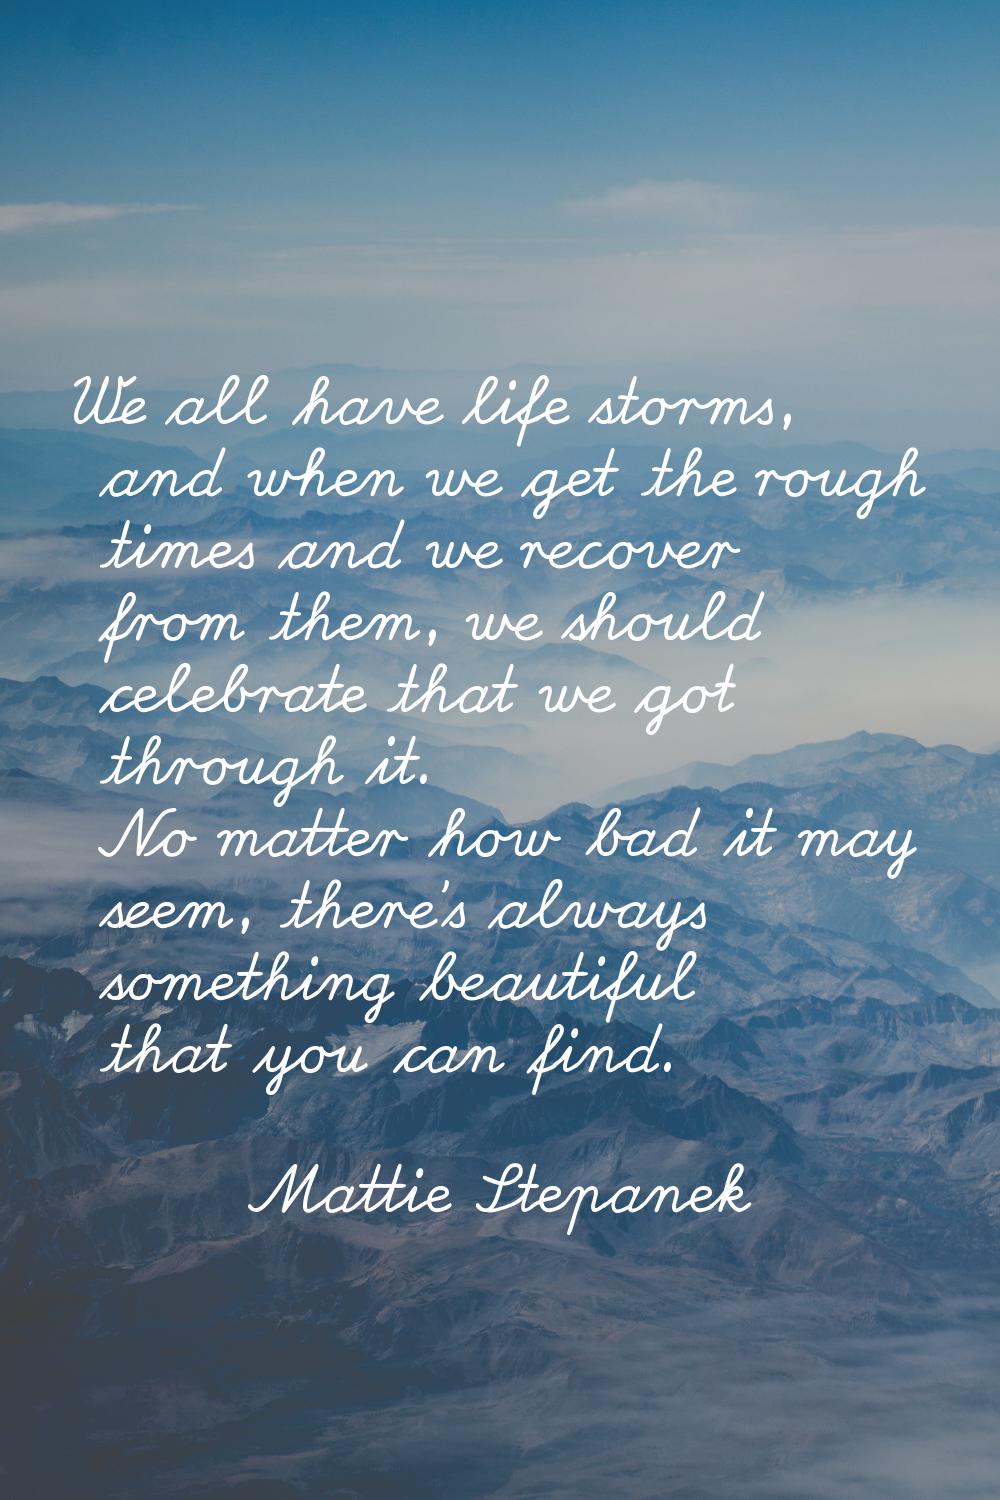 We all have life storms, and when we get the rough times and we recover from them, we should celebr